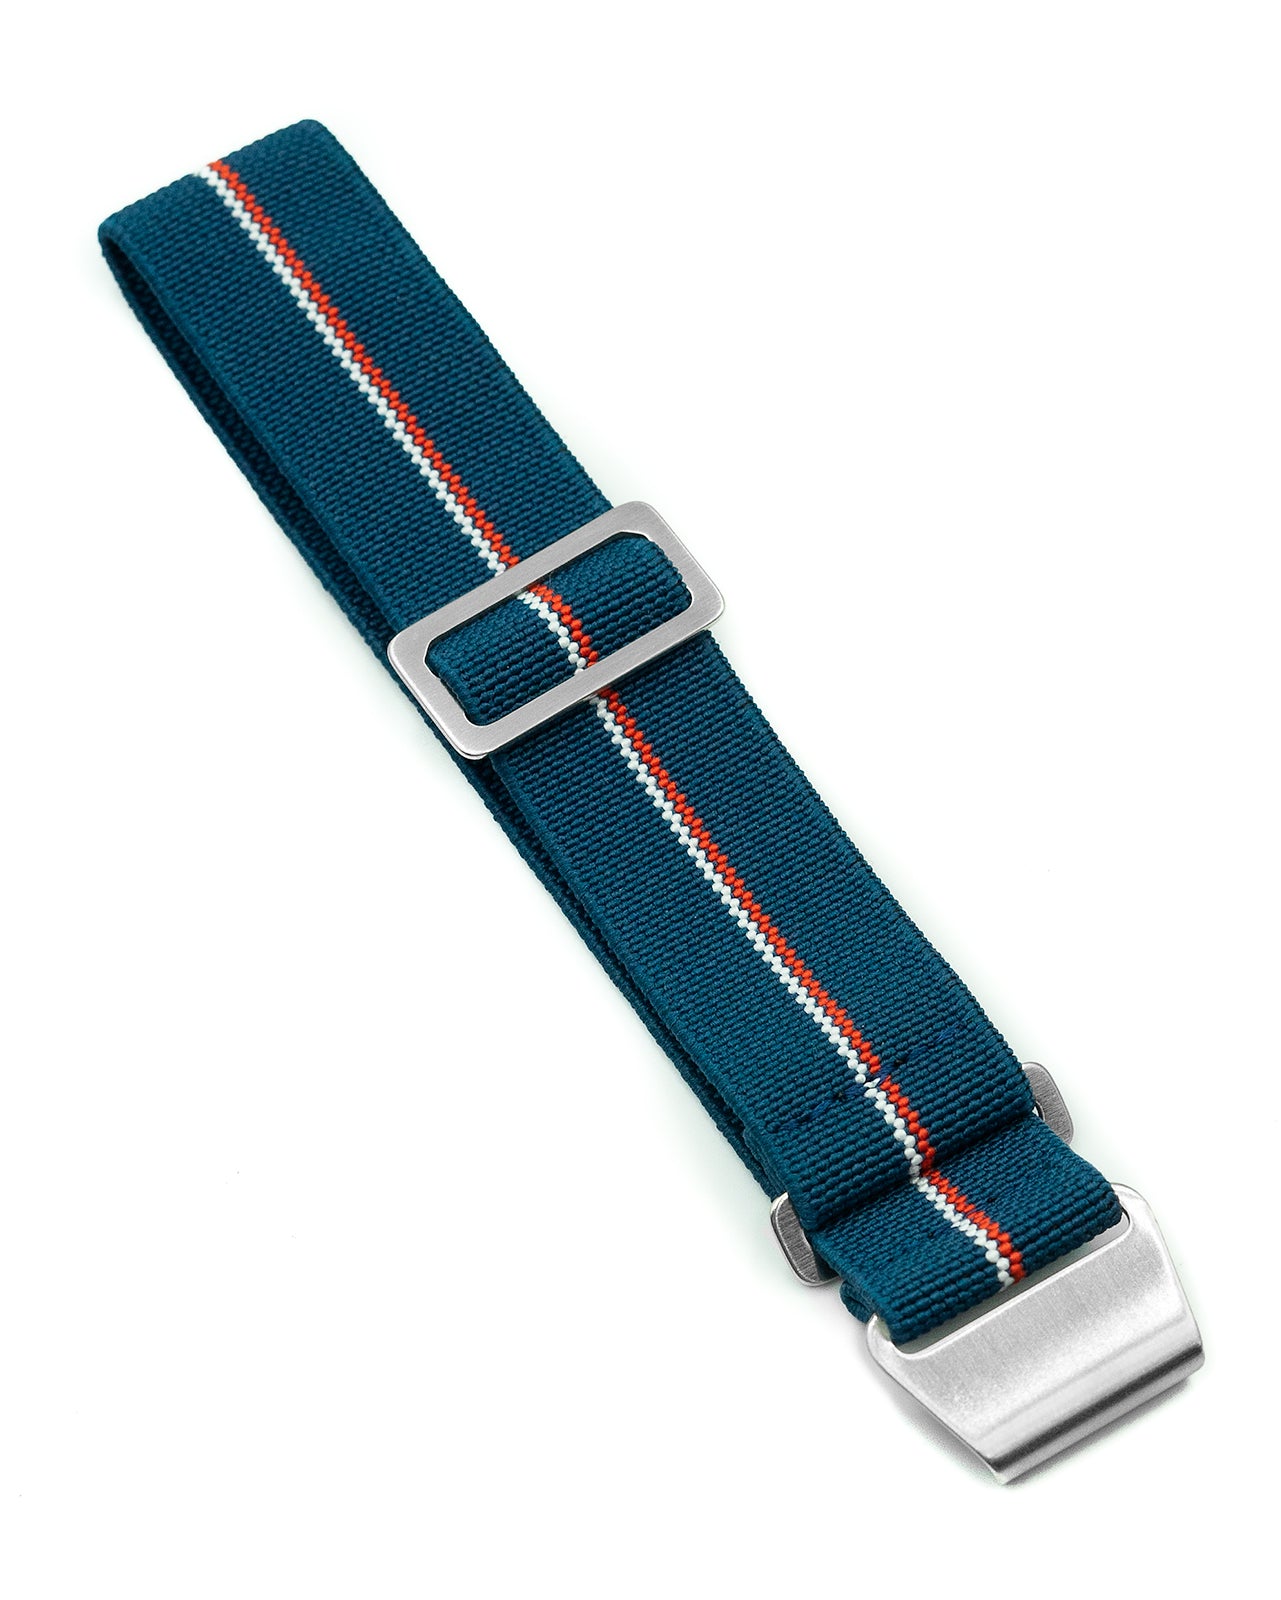 PARA Elastic - Blue with Red & White Centerline